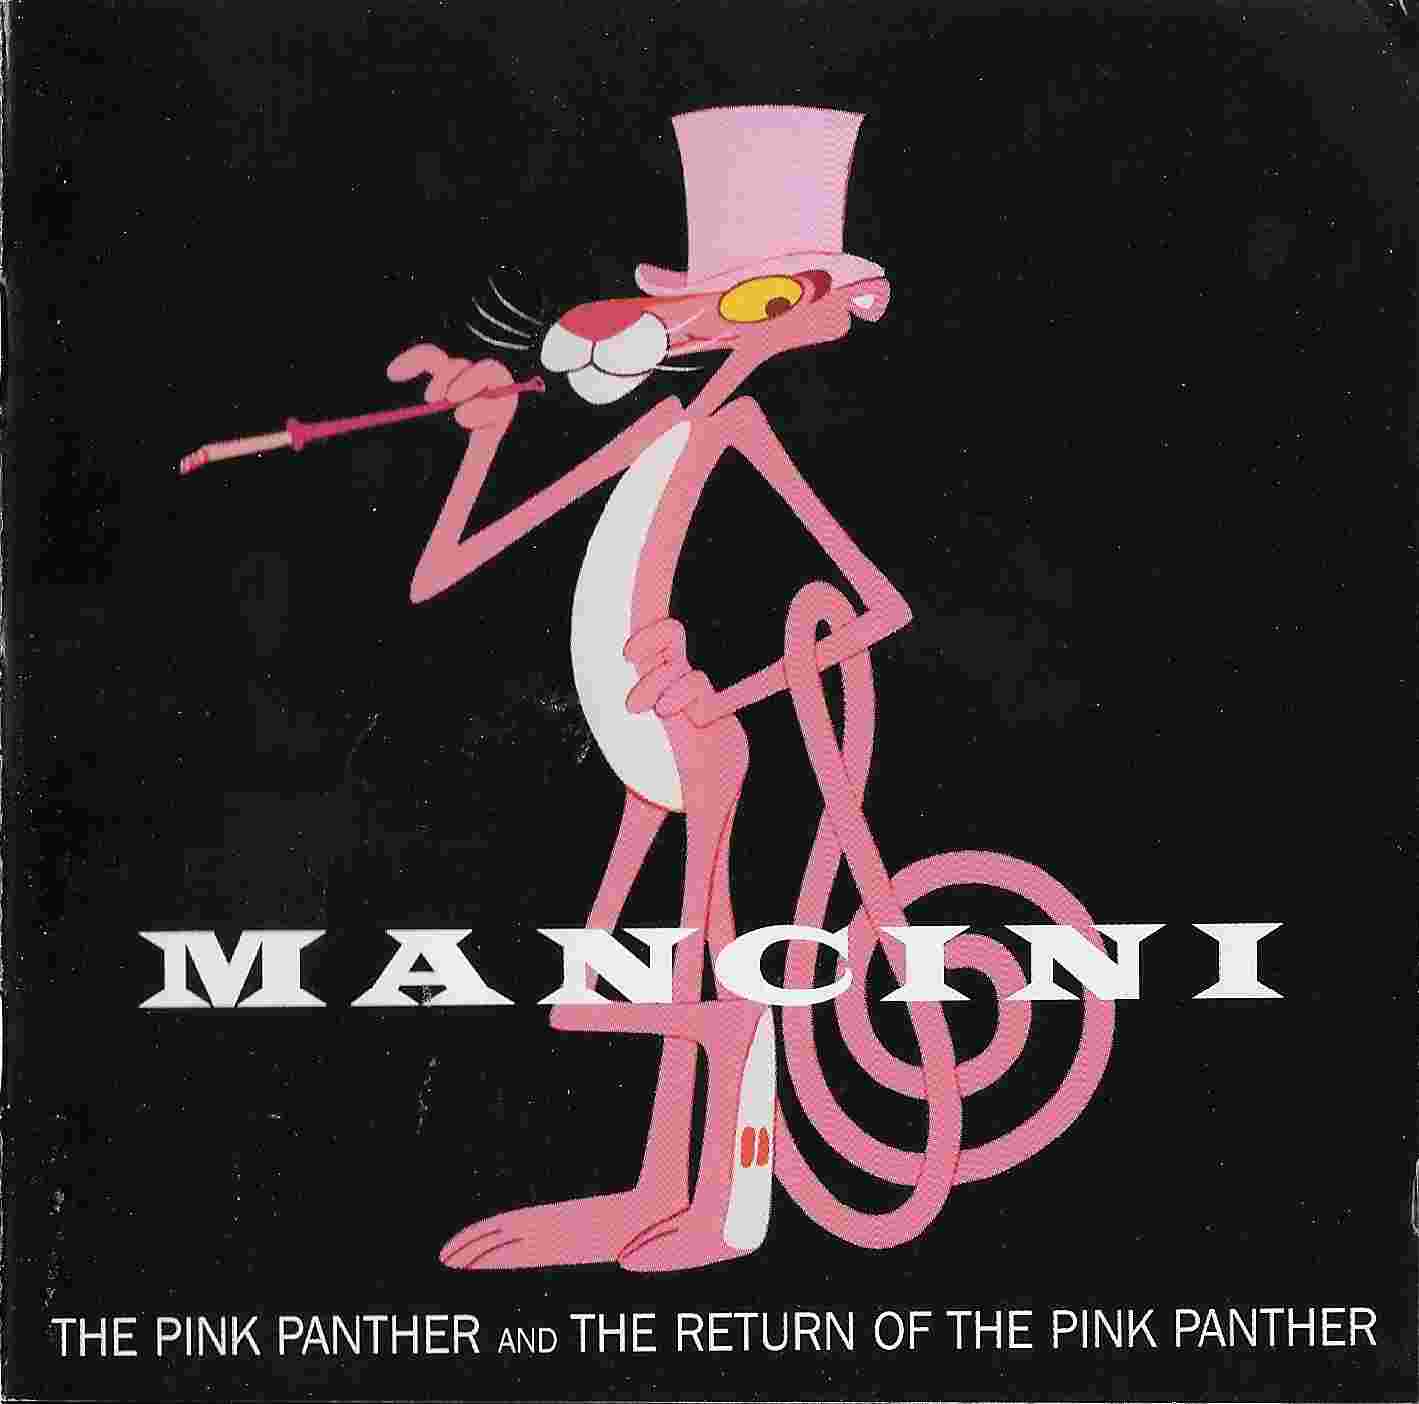 Picture of The Pink Panther / The return of the Pink Panther by artist Henry Mancini from ITV, Channel 4 and Channel 5 cds library